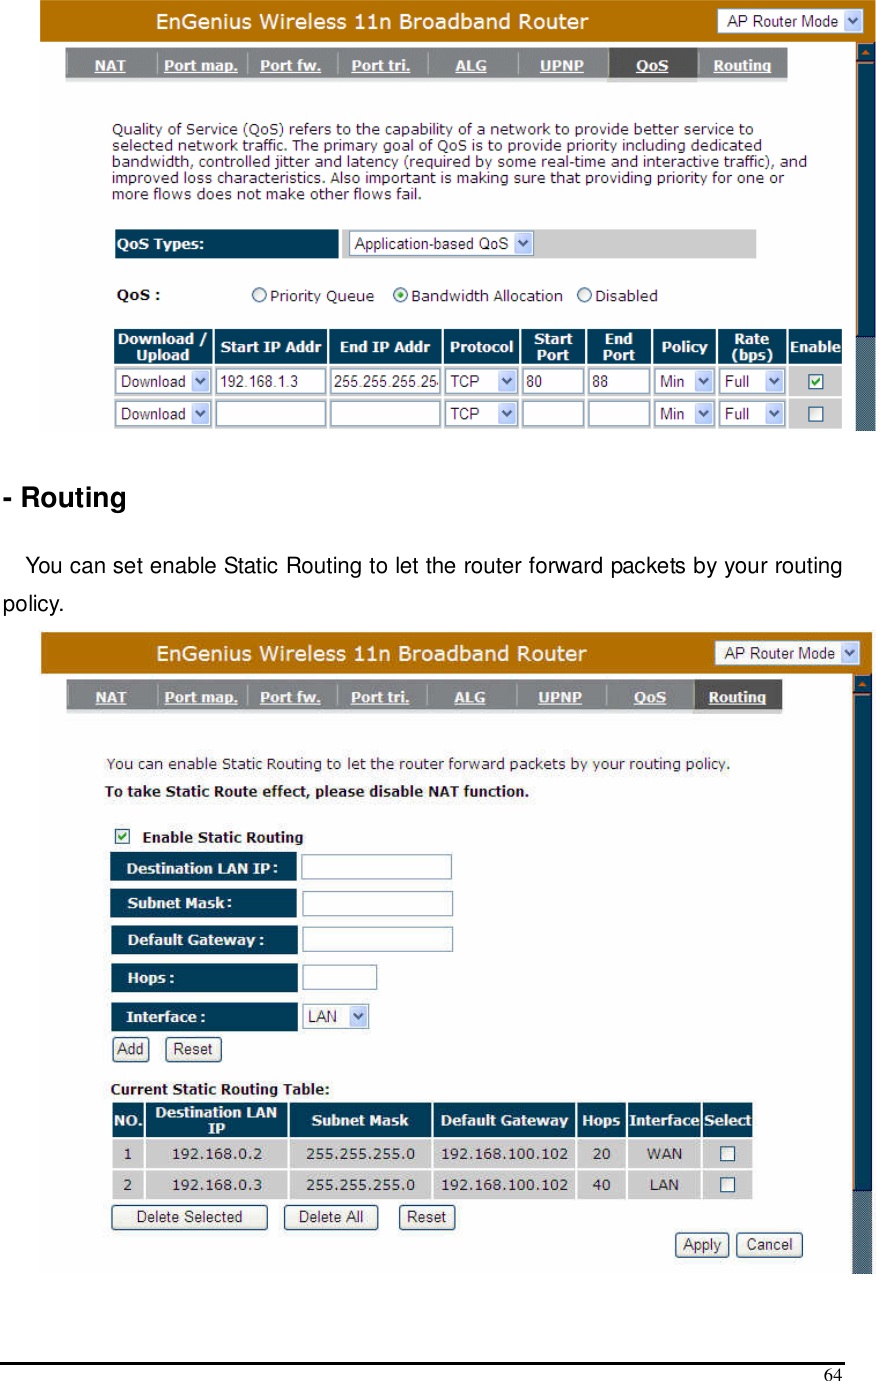  64   - Routing  You can set enable Static Routing to let the router forward packets by your routing policy.  